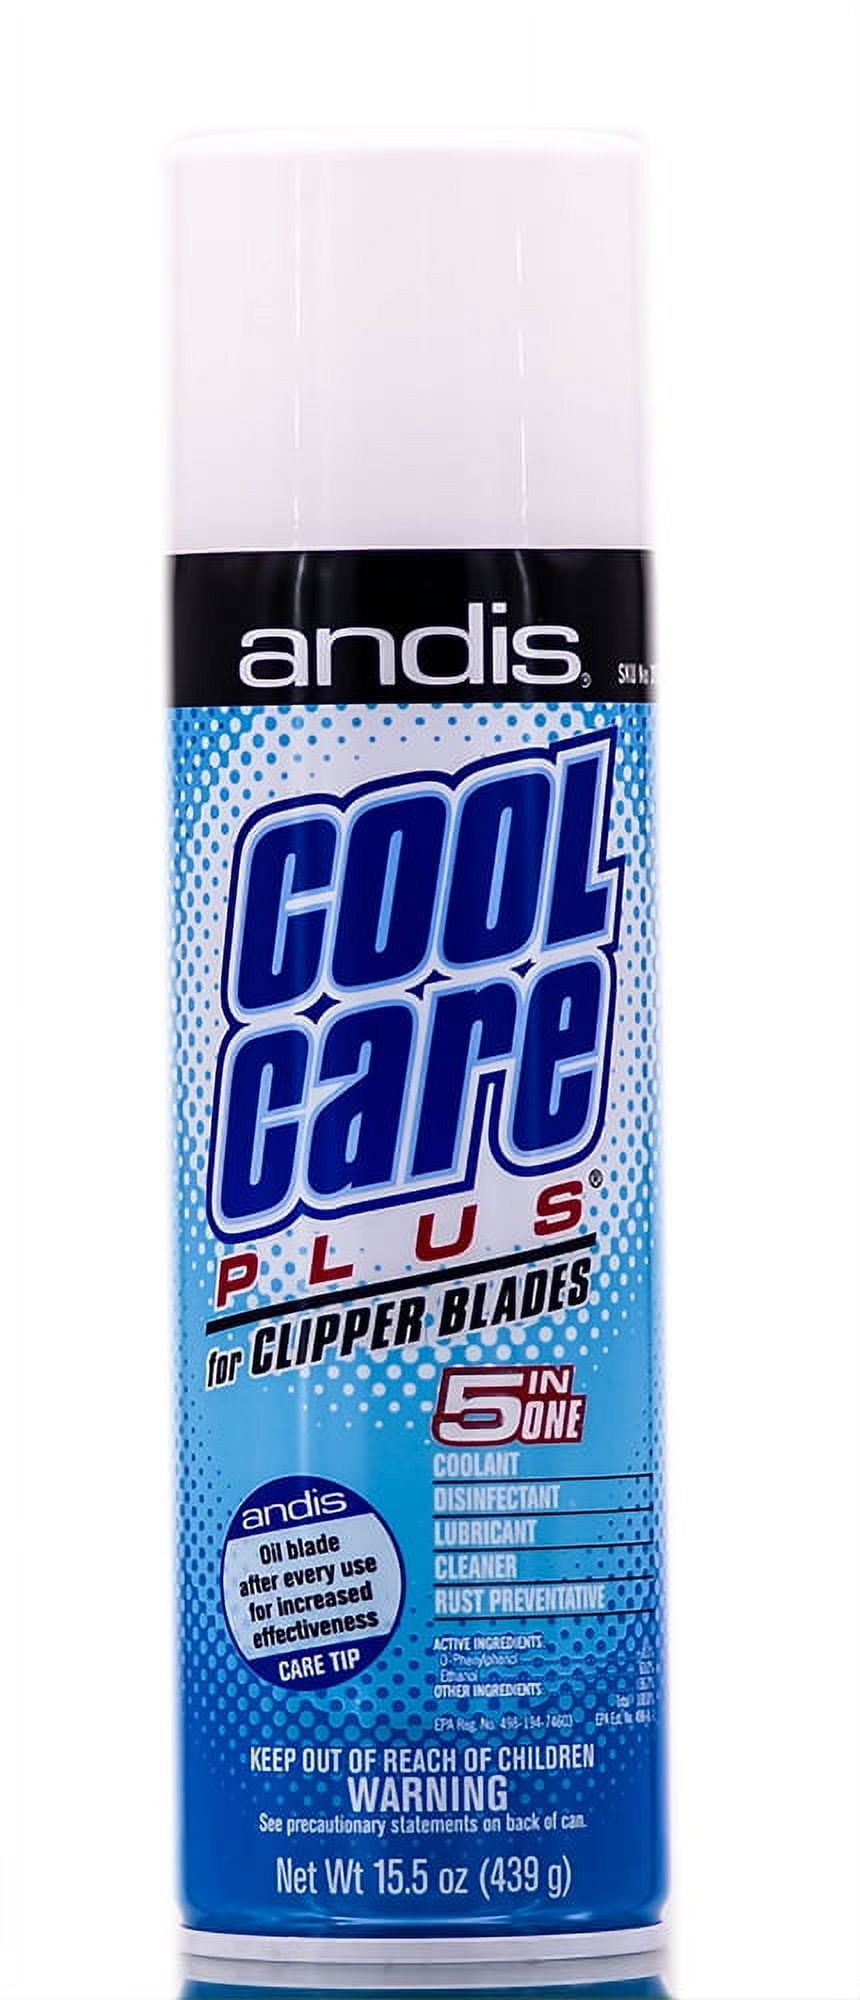 Andis Coolcare Maintenance Product 6oz 